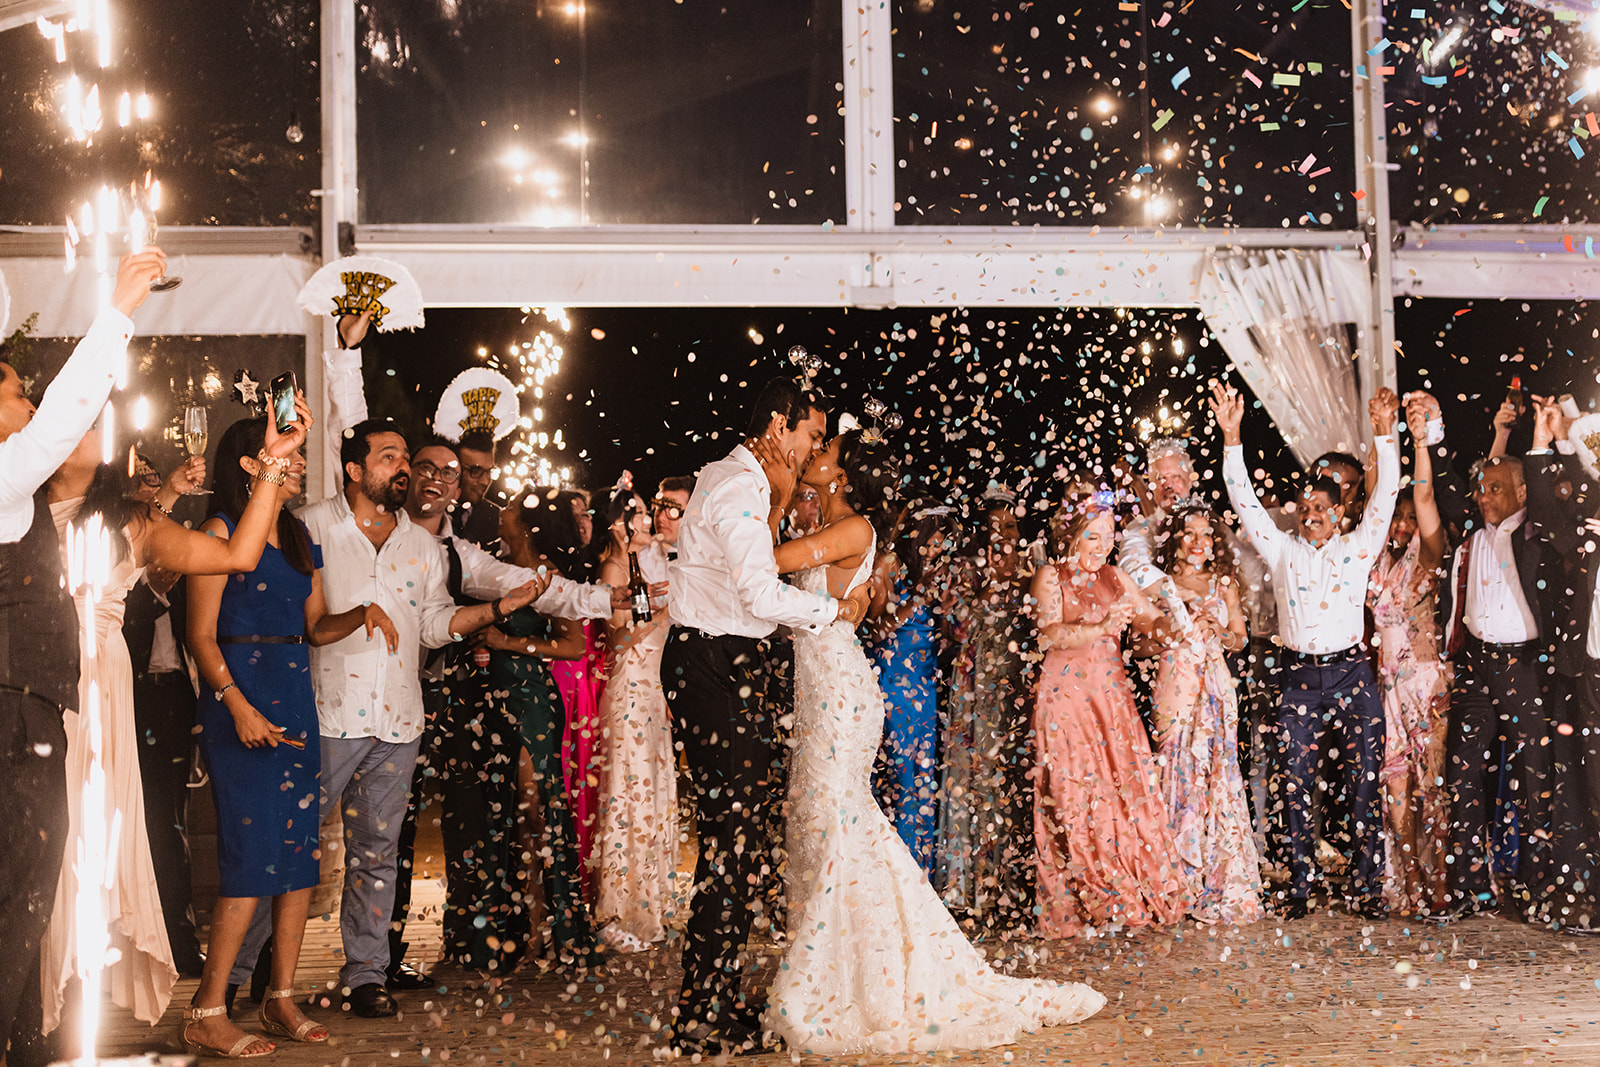 Bride and groom confetti shower at the reception at the Wedding in Mona Farm Braidwood, New South Wales